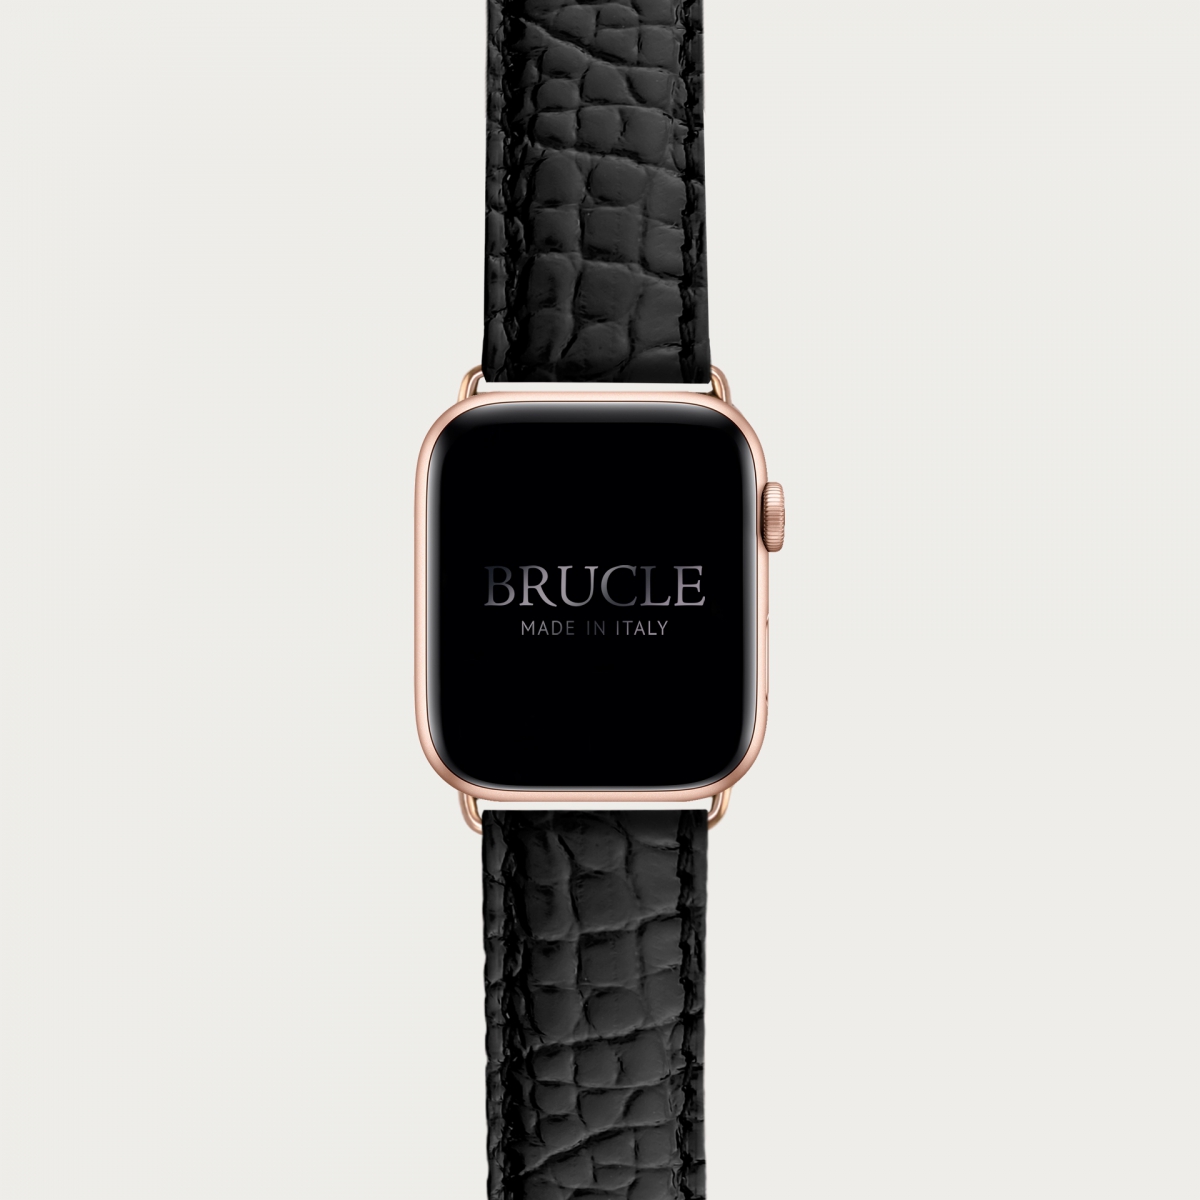 Black Alligator leather watch band compatible with Apple Watch / Samsung smartwatch